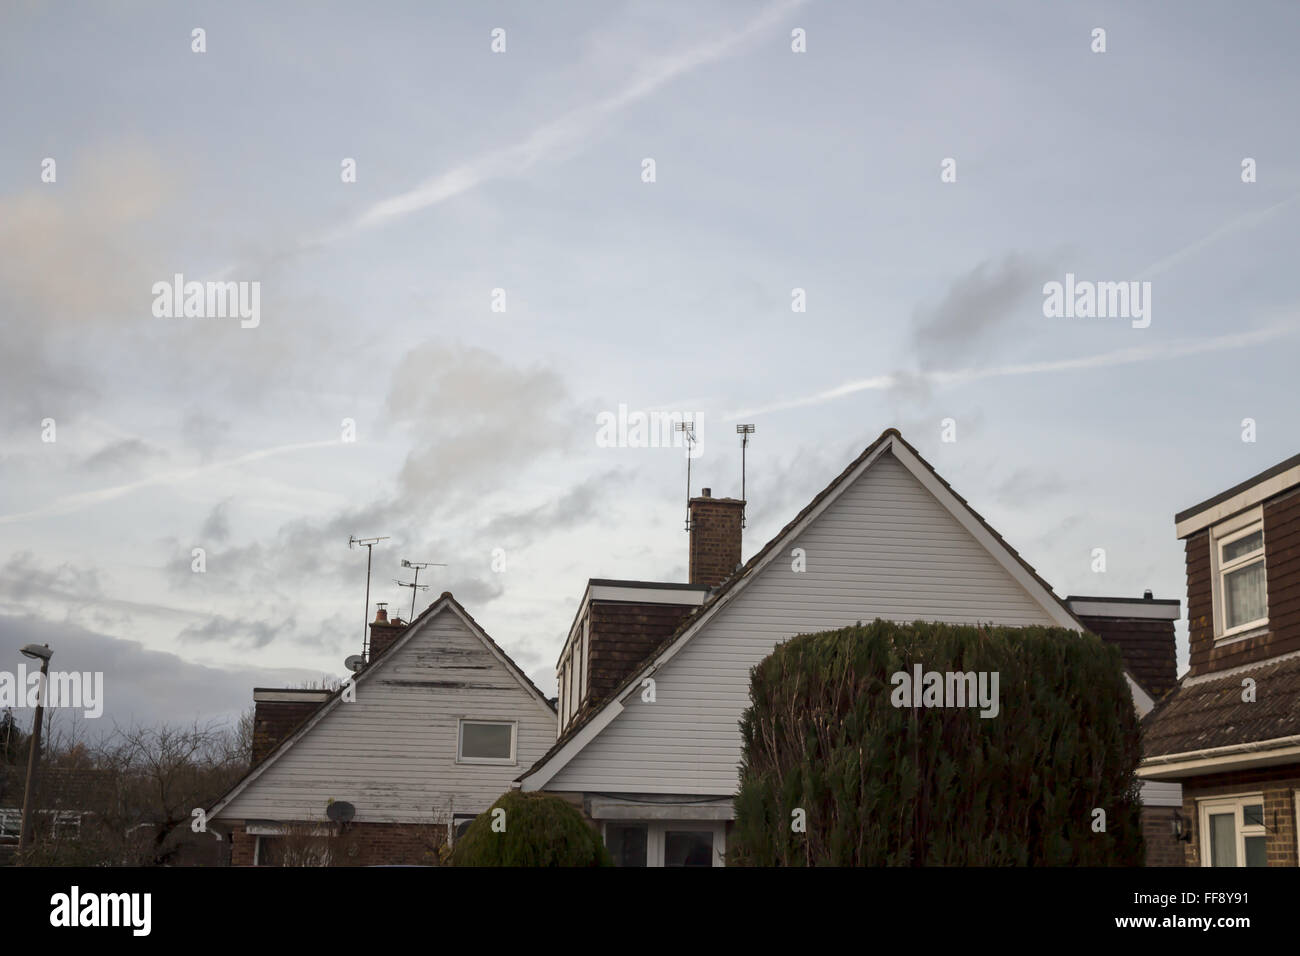 Houses in against cloudy sky Stock Photo